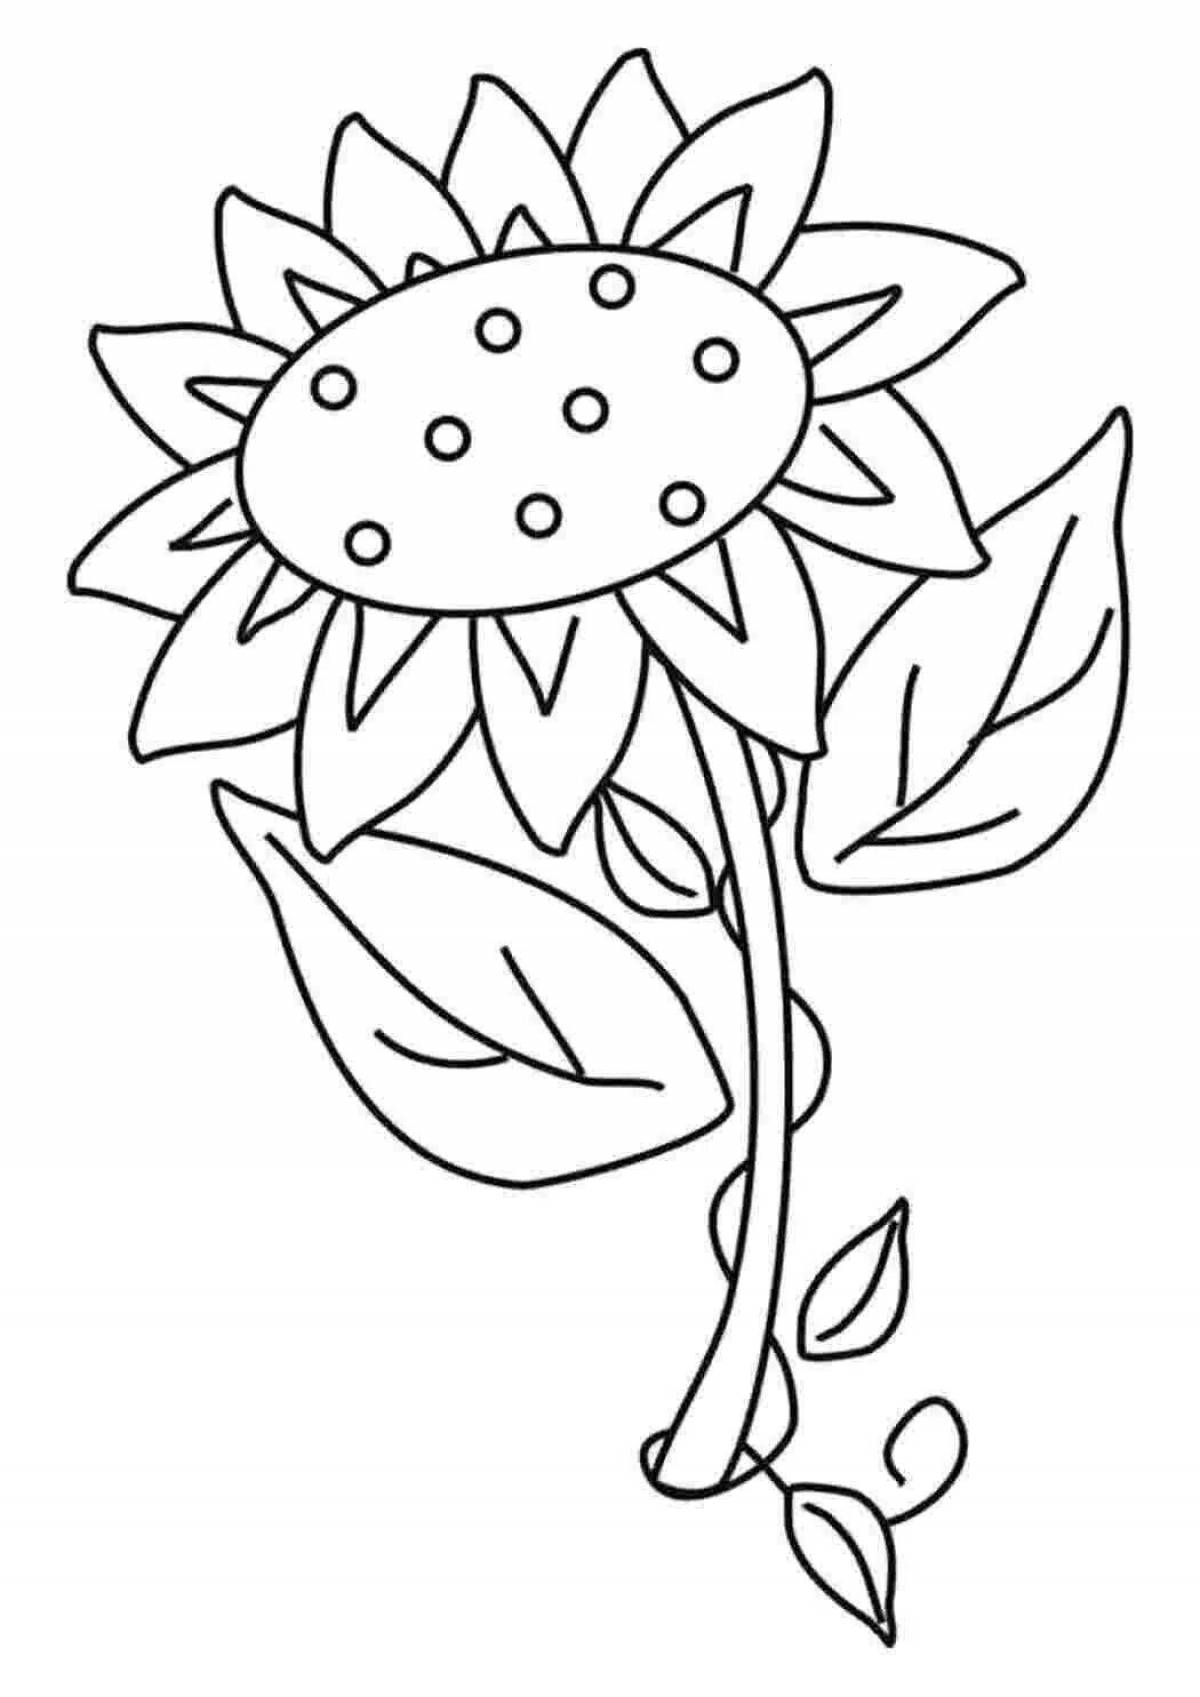 A wonderful sunflower coloring book for preschoolers 2-3 years old